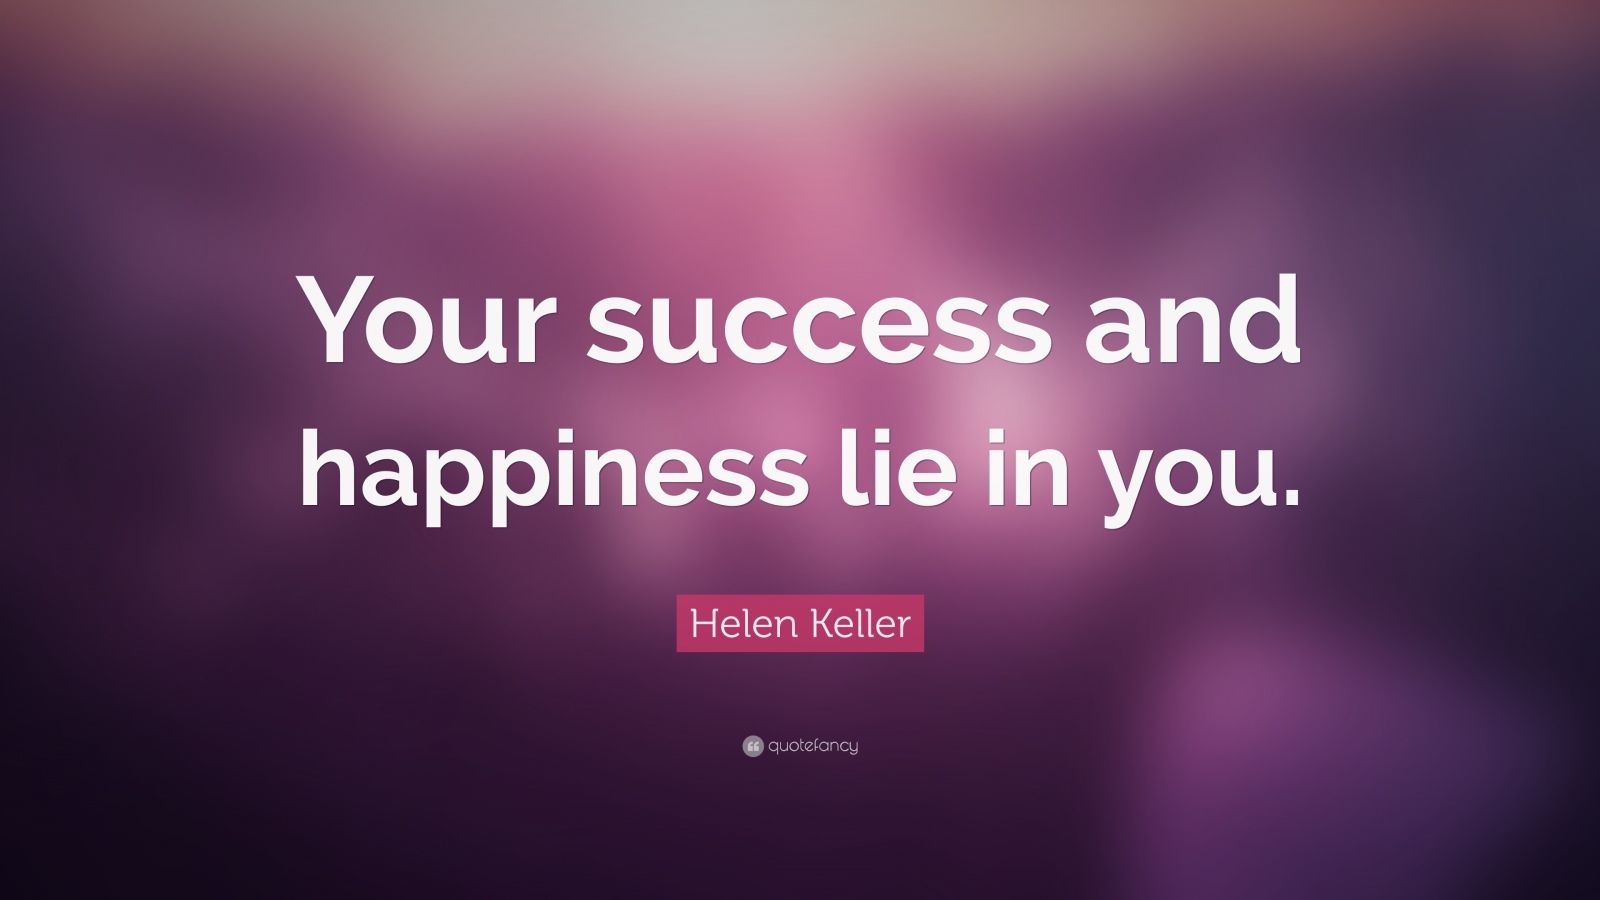 Helen Keller Quote: “Your success and happiness lie in you.”